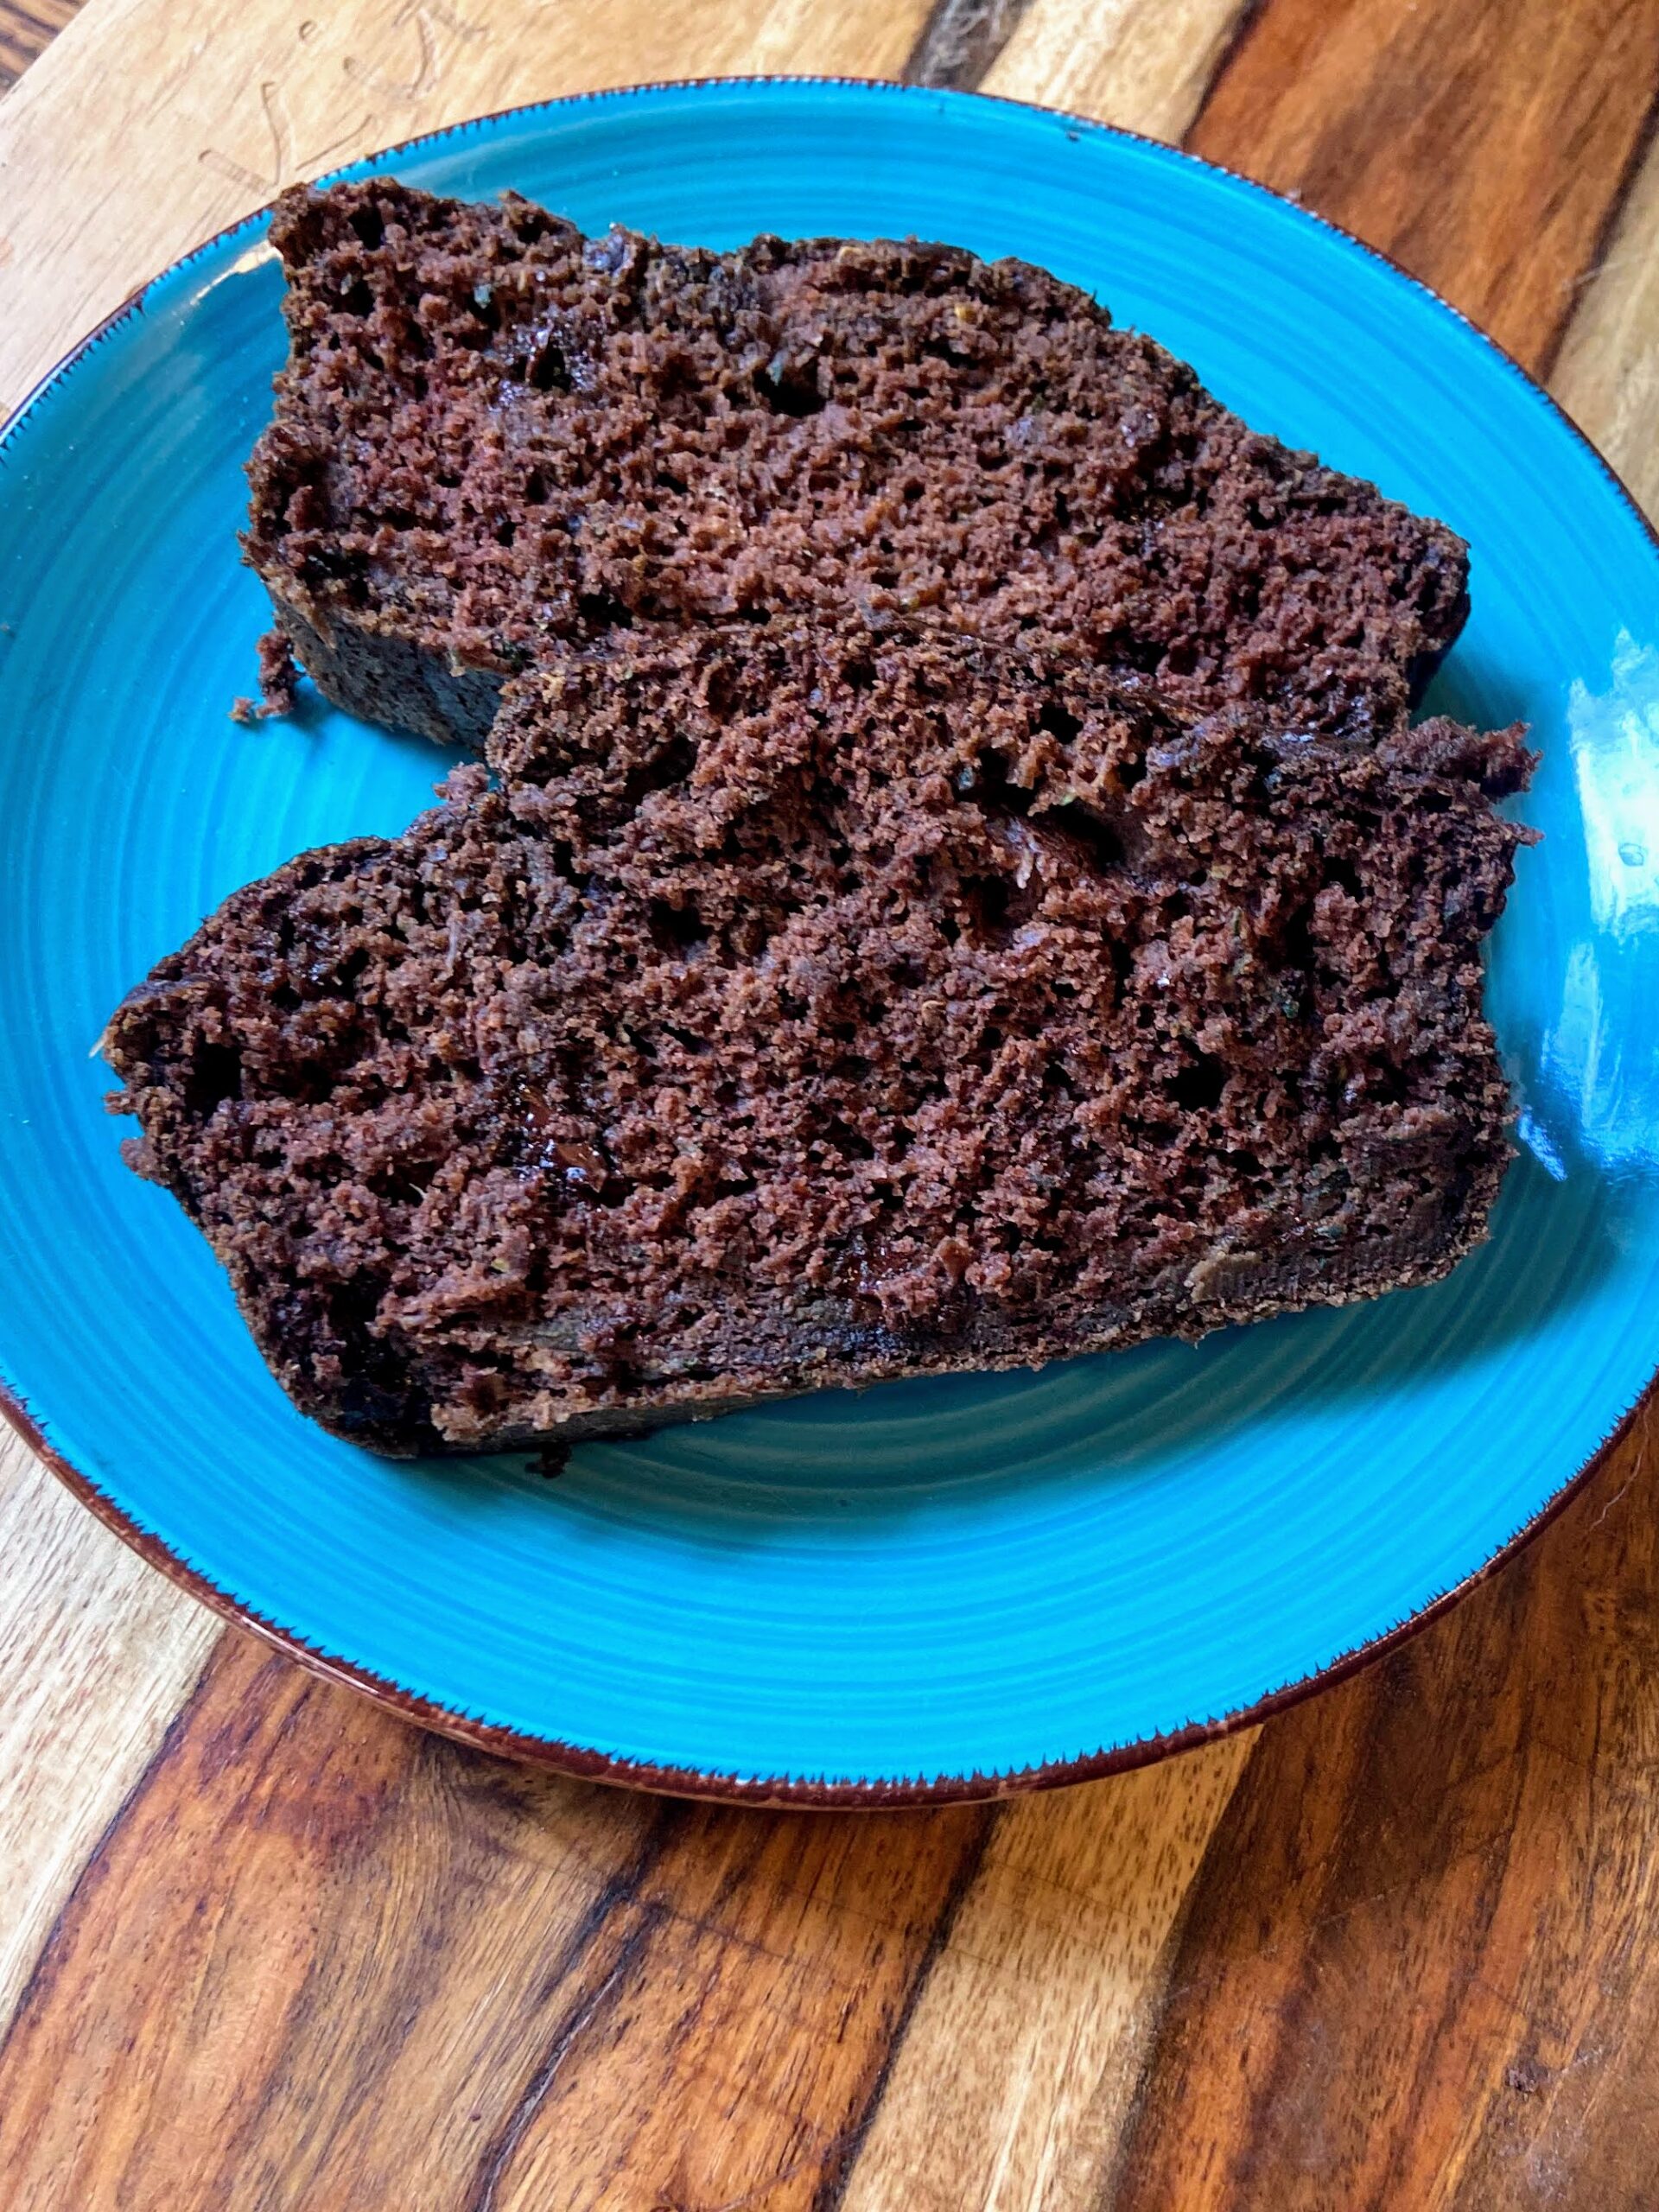 Completed chocolate zucchini bread